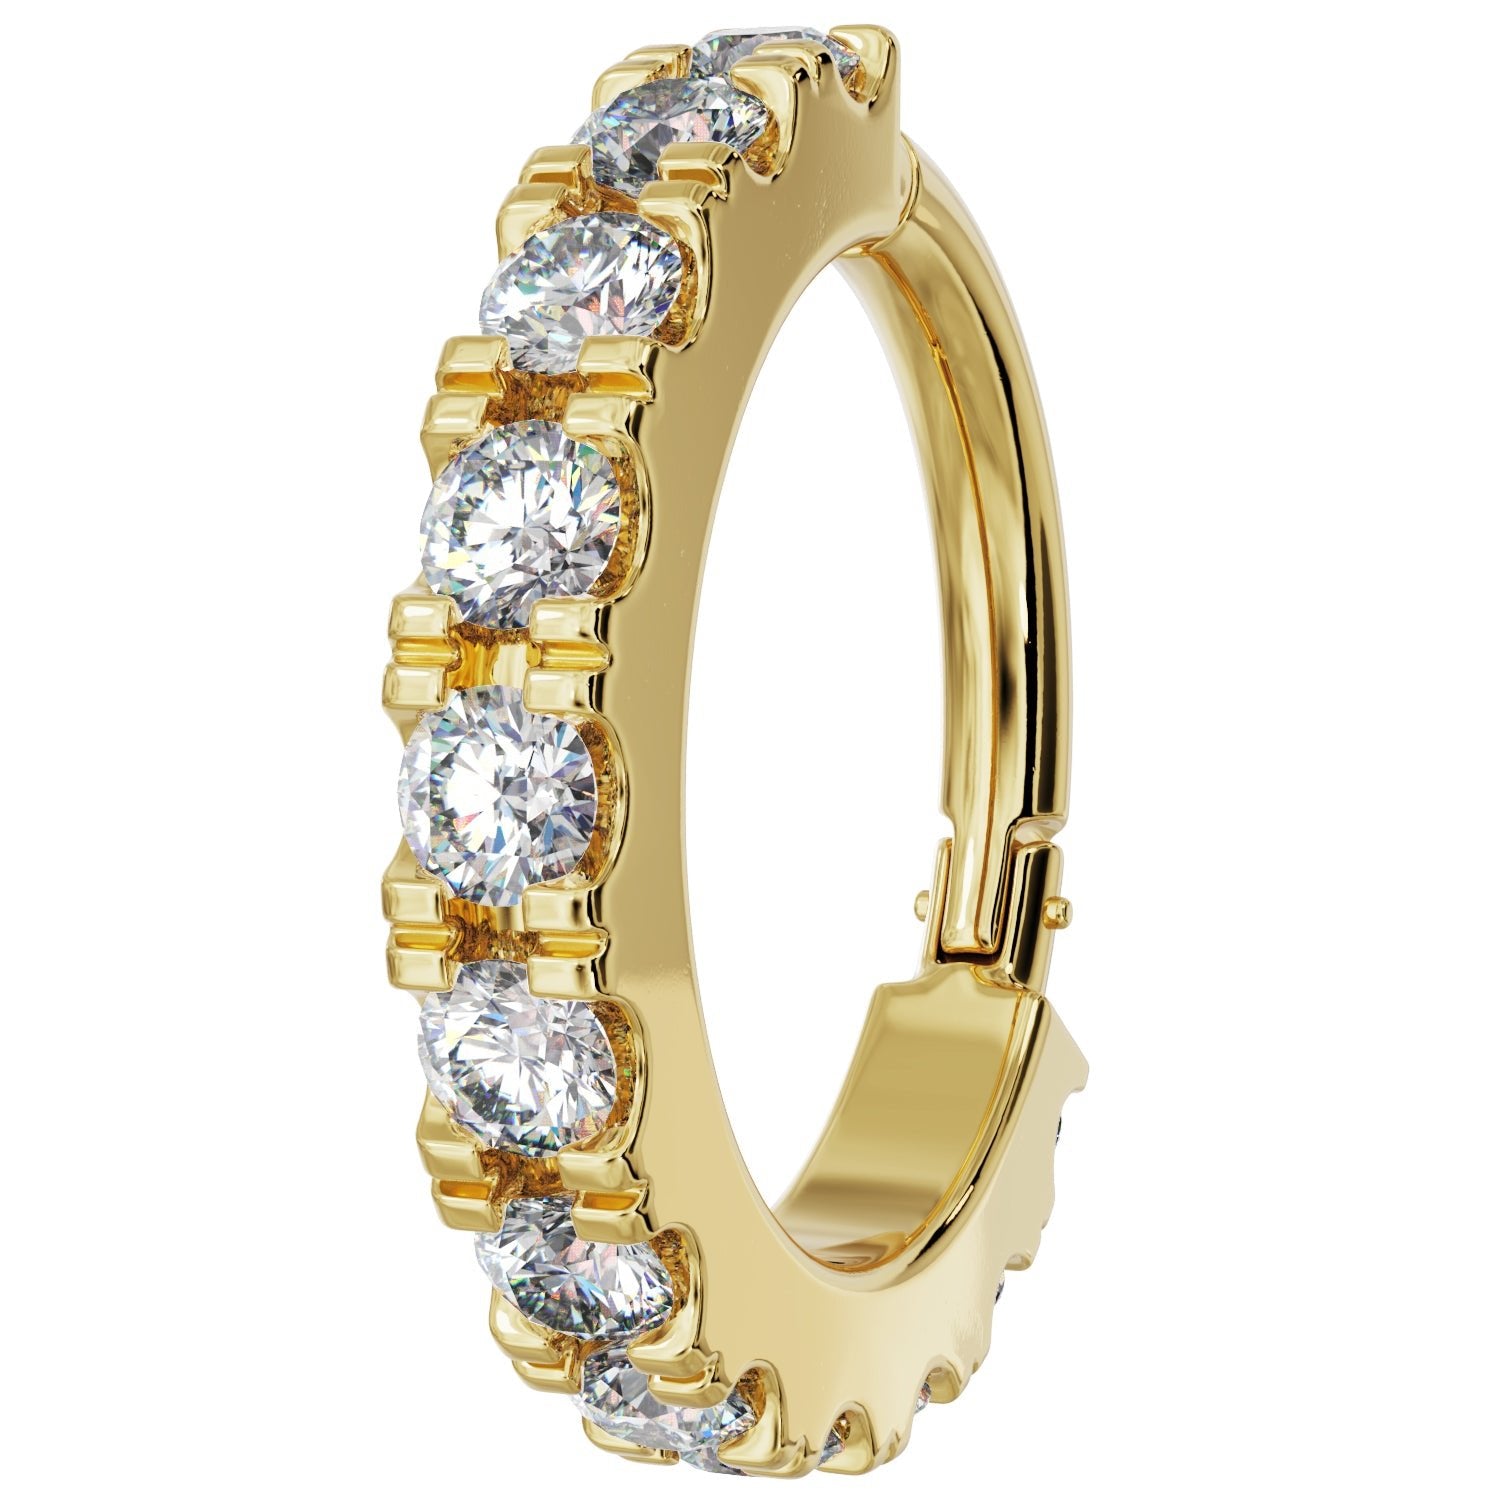 Cubic Zirconia Infinity Cartilage Earring 14k Gold Clicker Ring-14K Yellow Gold   16G (1.2mm)   3 8